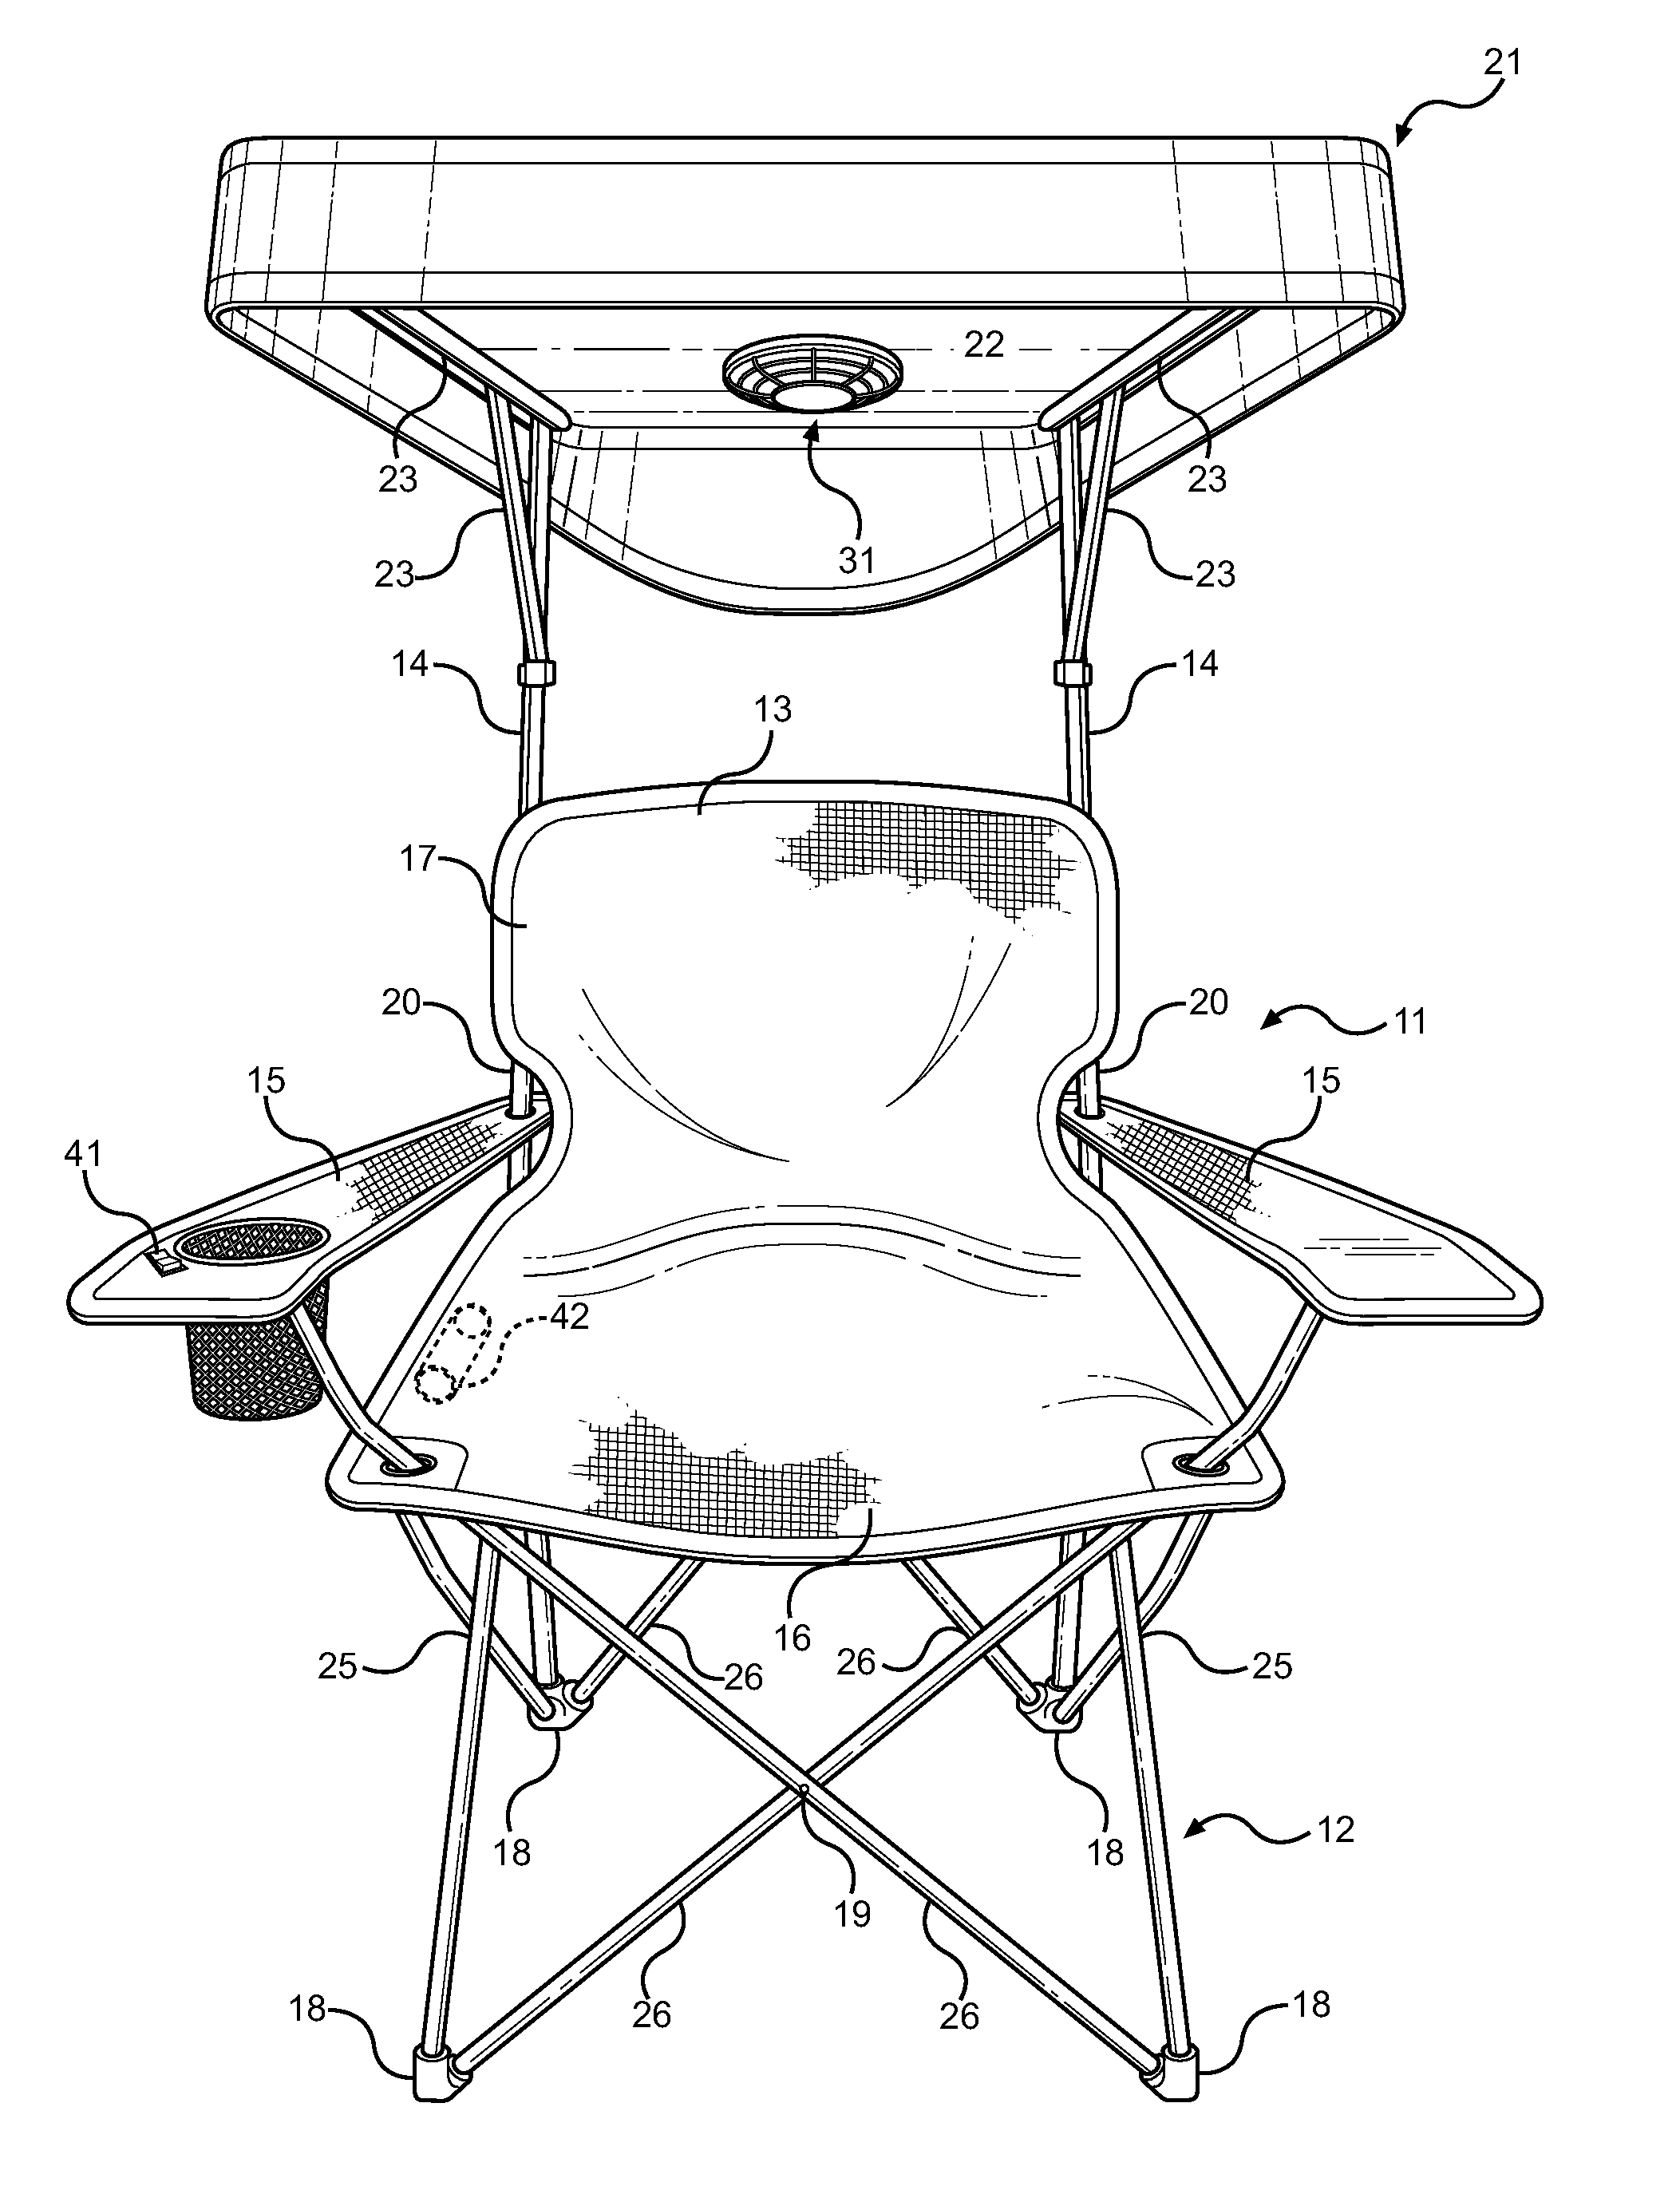 Fan-Cooled Collapsible Canopy Chair